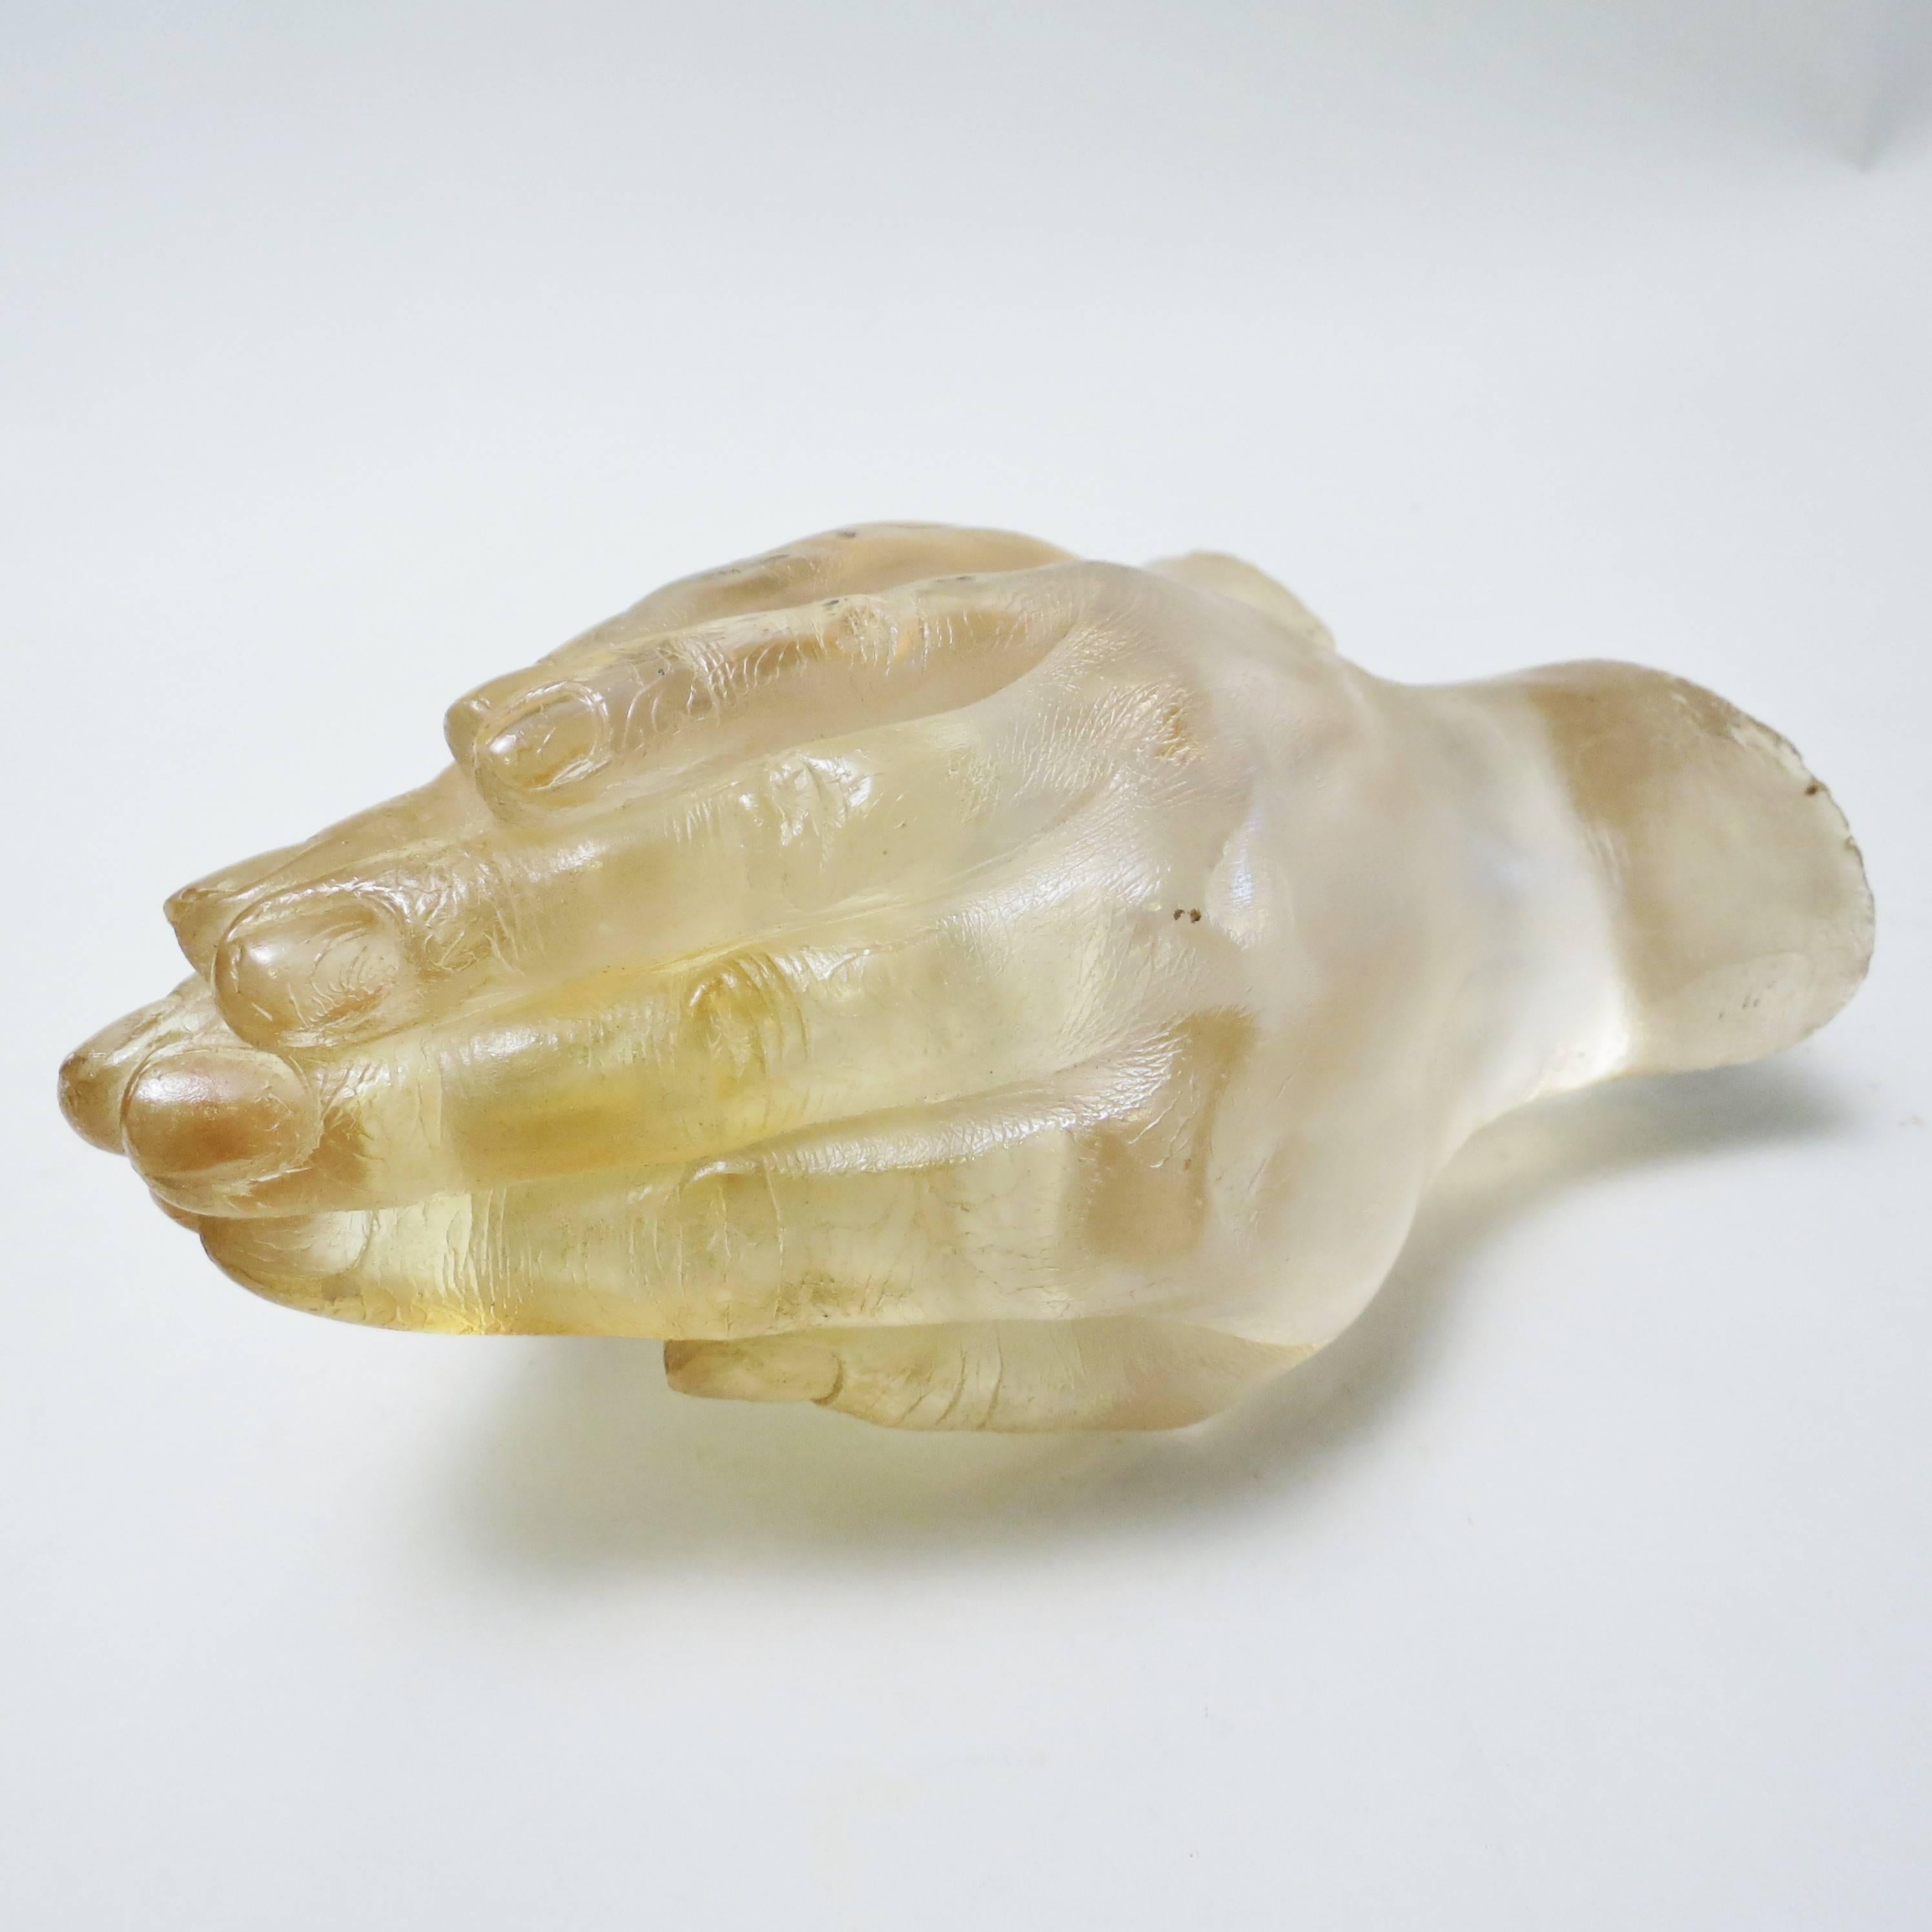 Cast Sculpture Hands in Yellow Resin Attributed to Pierre Giraudon